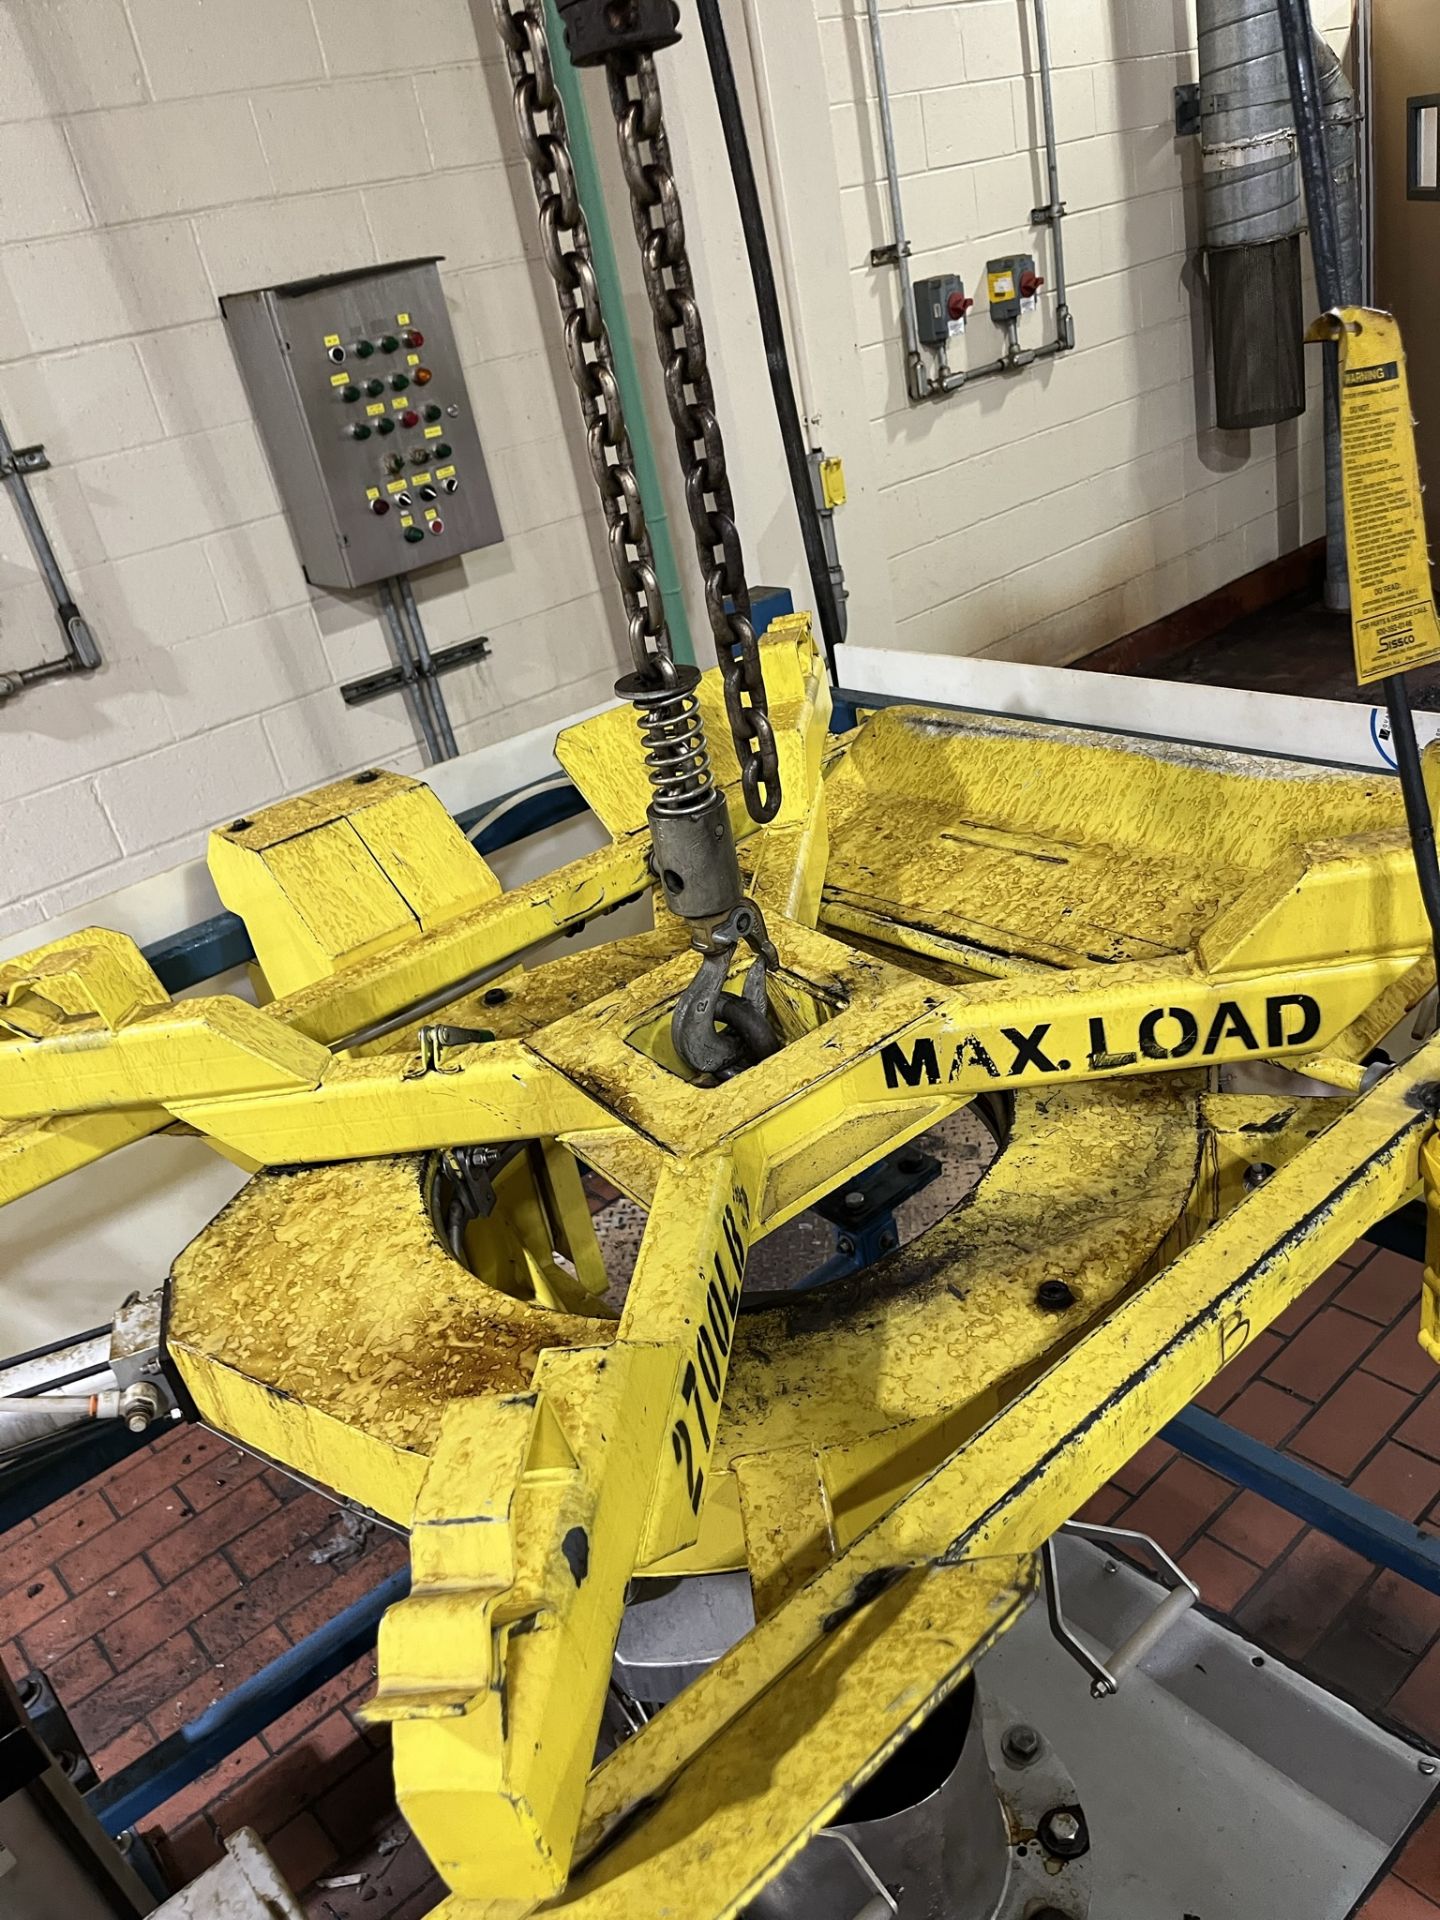 FLEXICON SUPERSAC UNLOADER, BULK BAG DISCHARGER 2700 LBS MAX LOAD, INCLUDES I-BEAM WITH ELECTRIC - Image 6 of 10